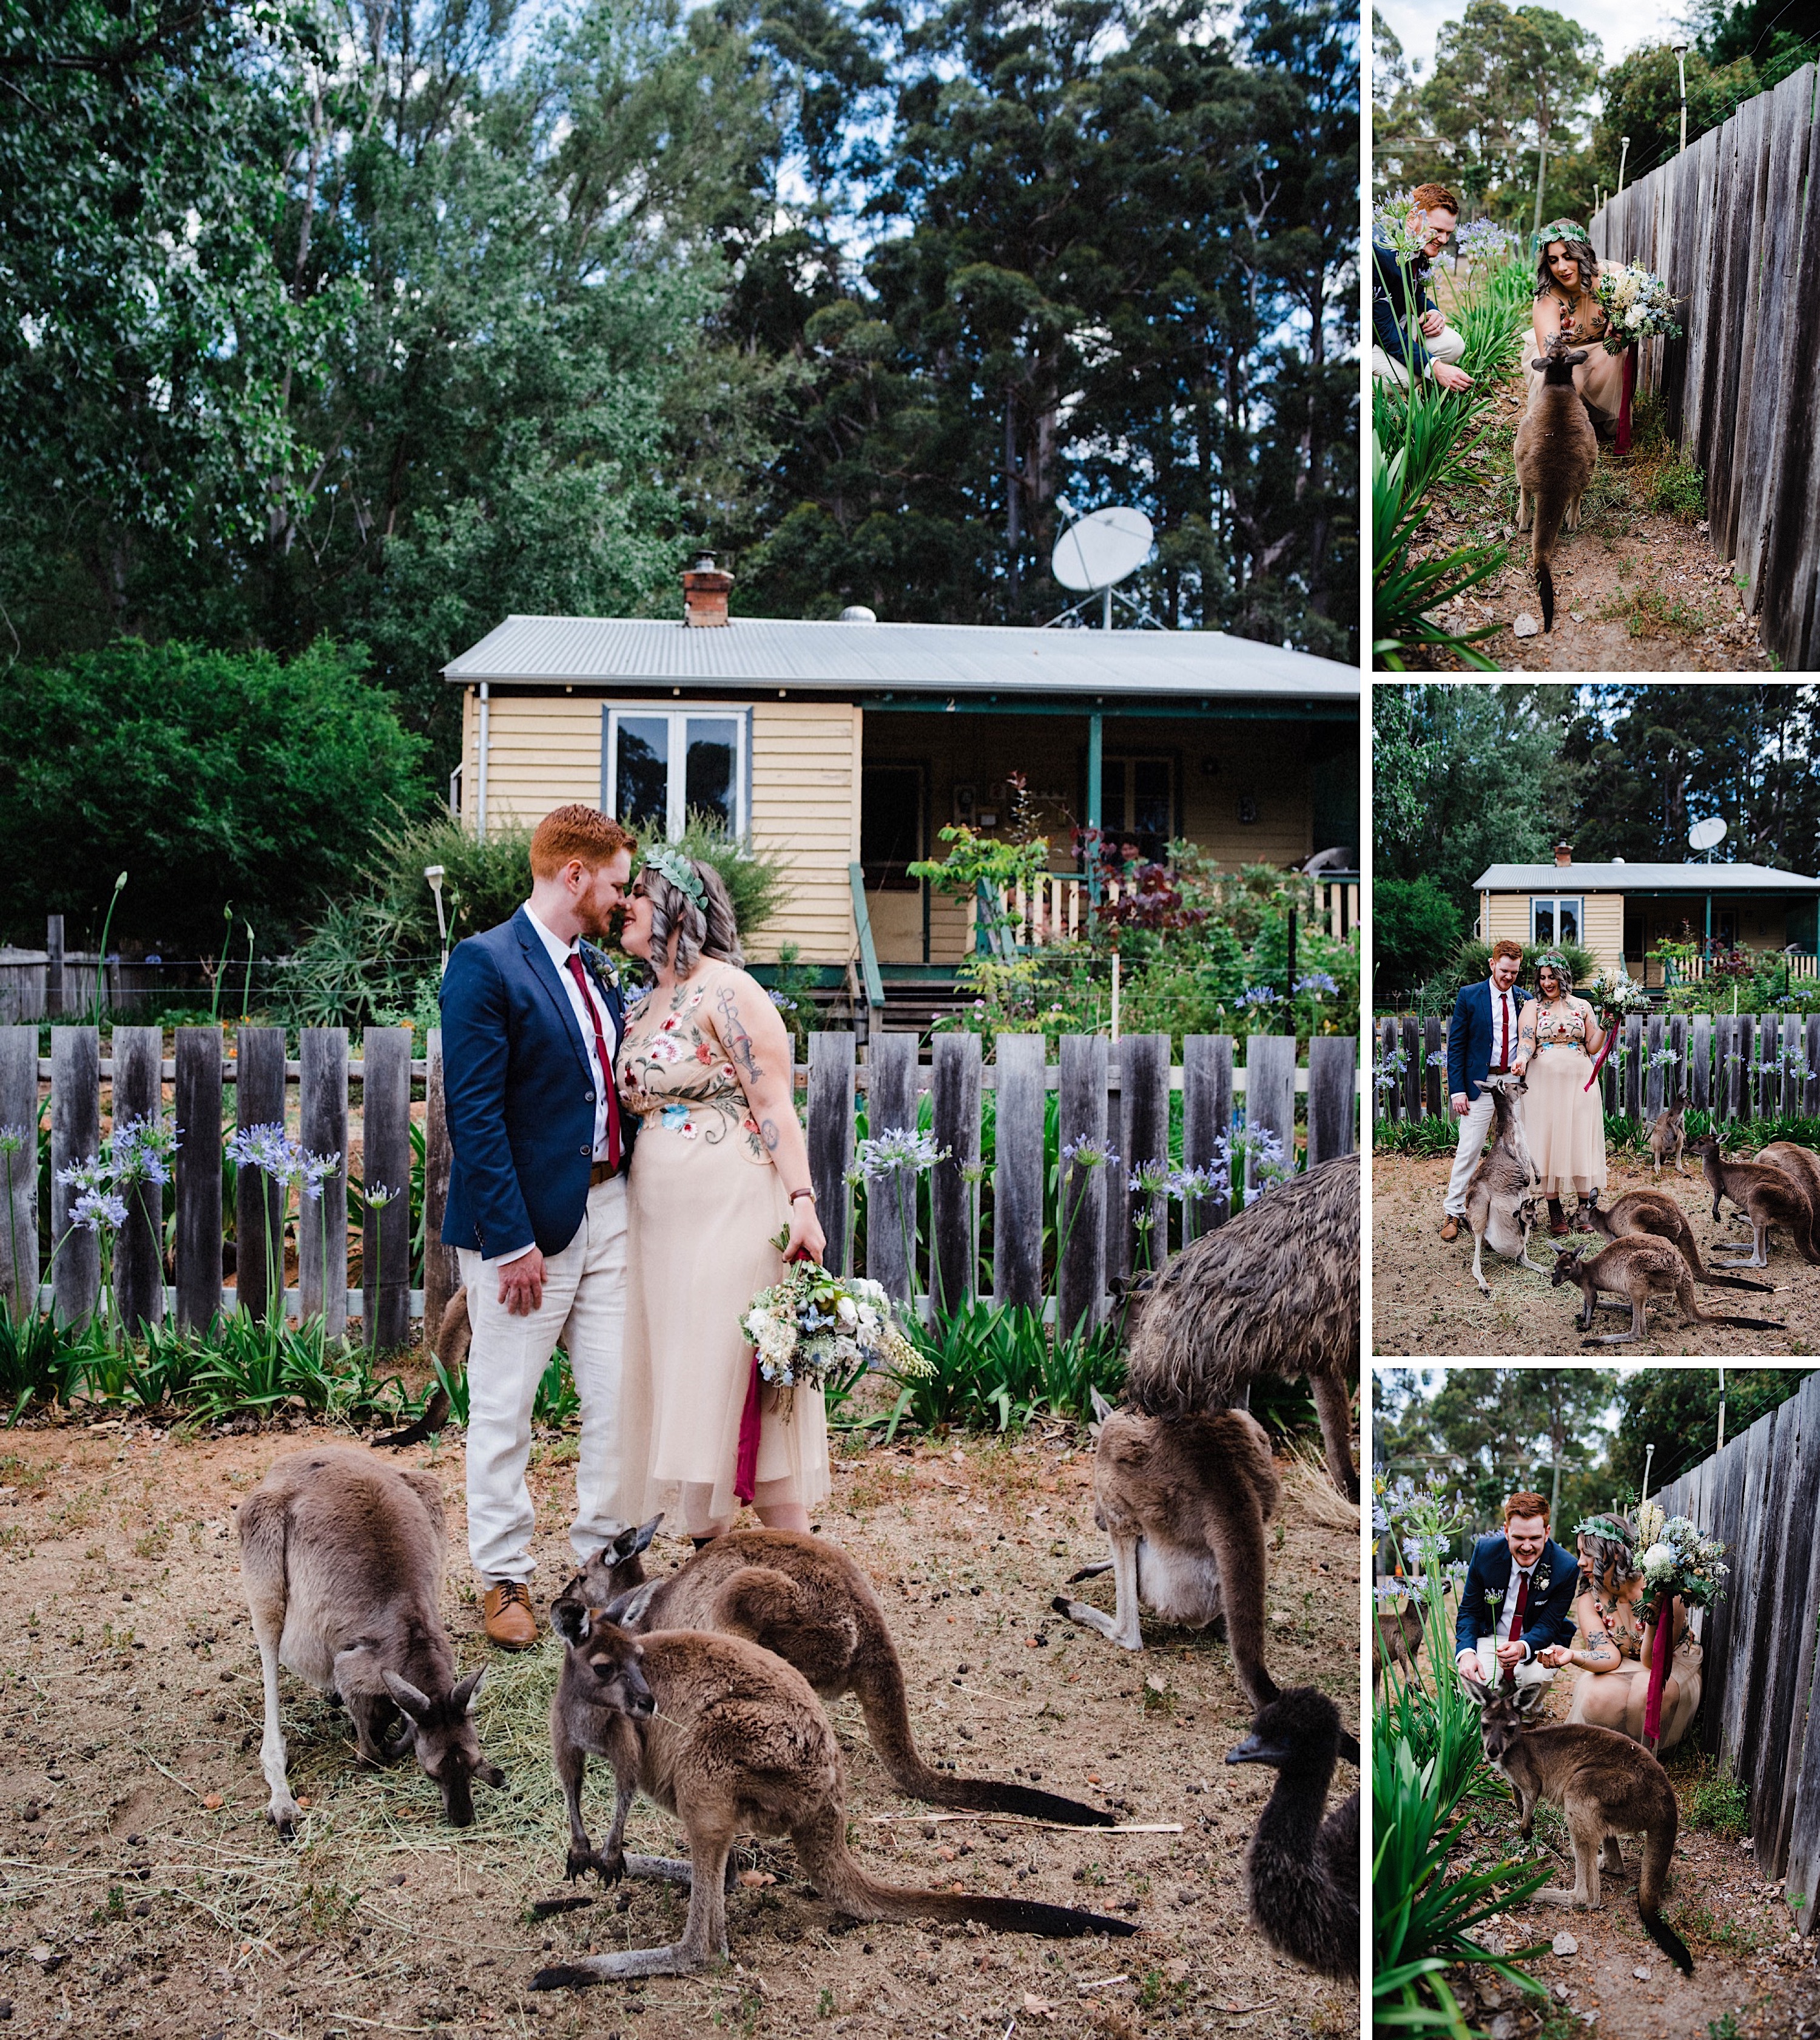 Wedding photography of the bride & groom surrounded by kangaroos and emus at Donnelly River Village.